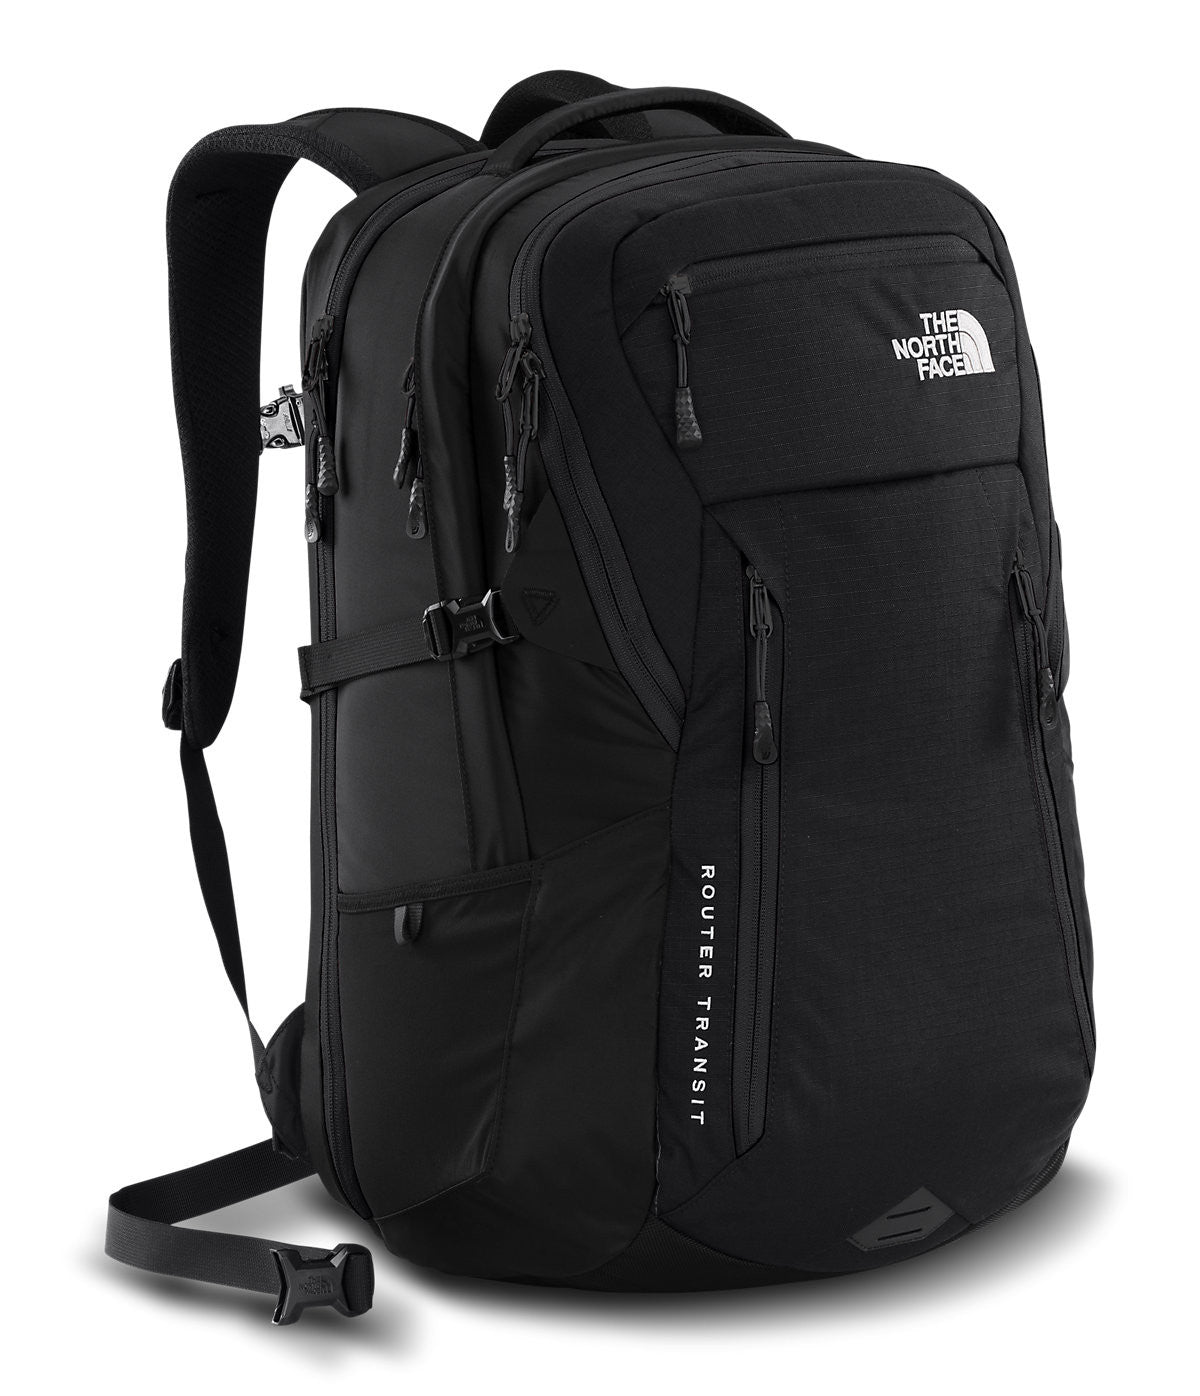 THE NORTH FACE ROUTER TRANSIT バックパック 41L | tspea.org